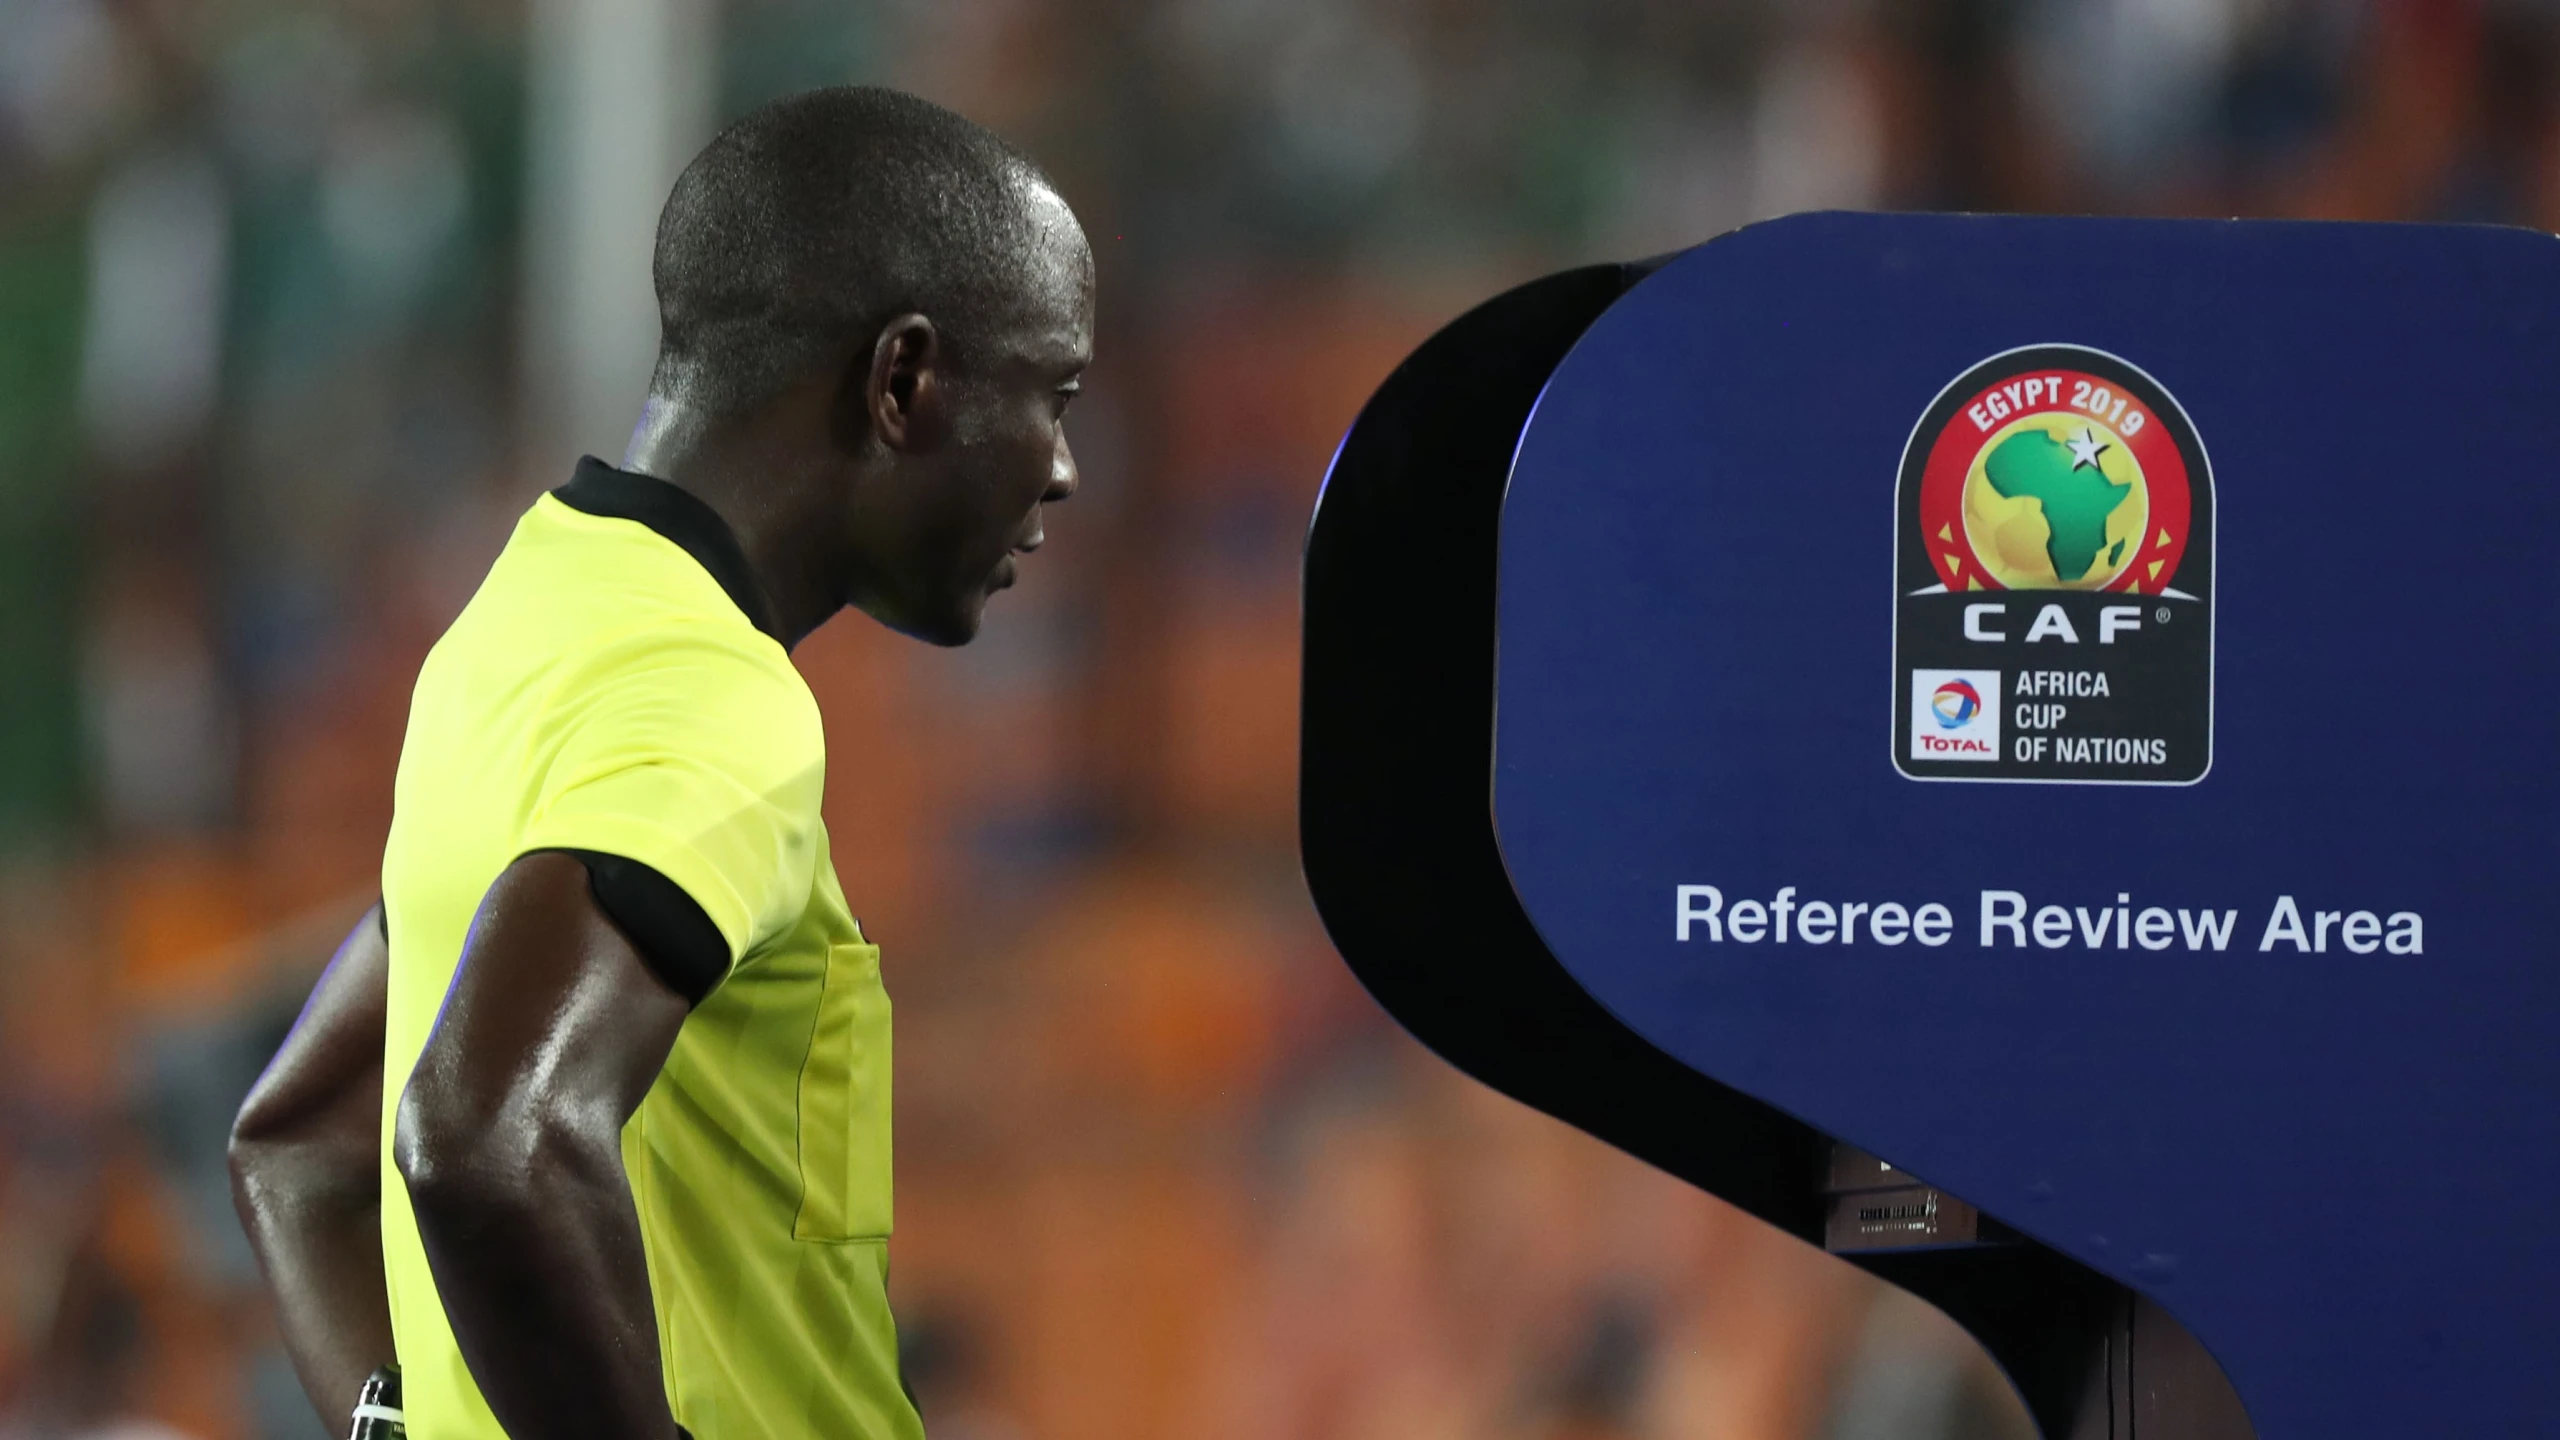 Progressing with the era: The Introduction of VAR in South African Football